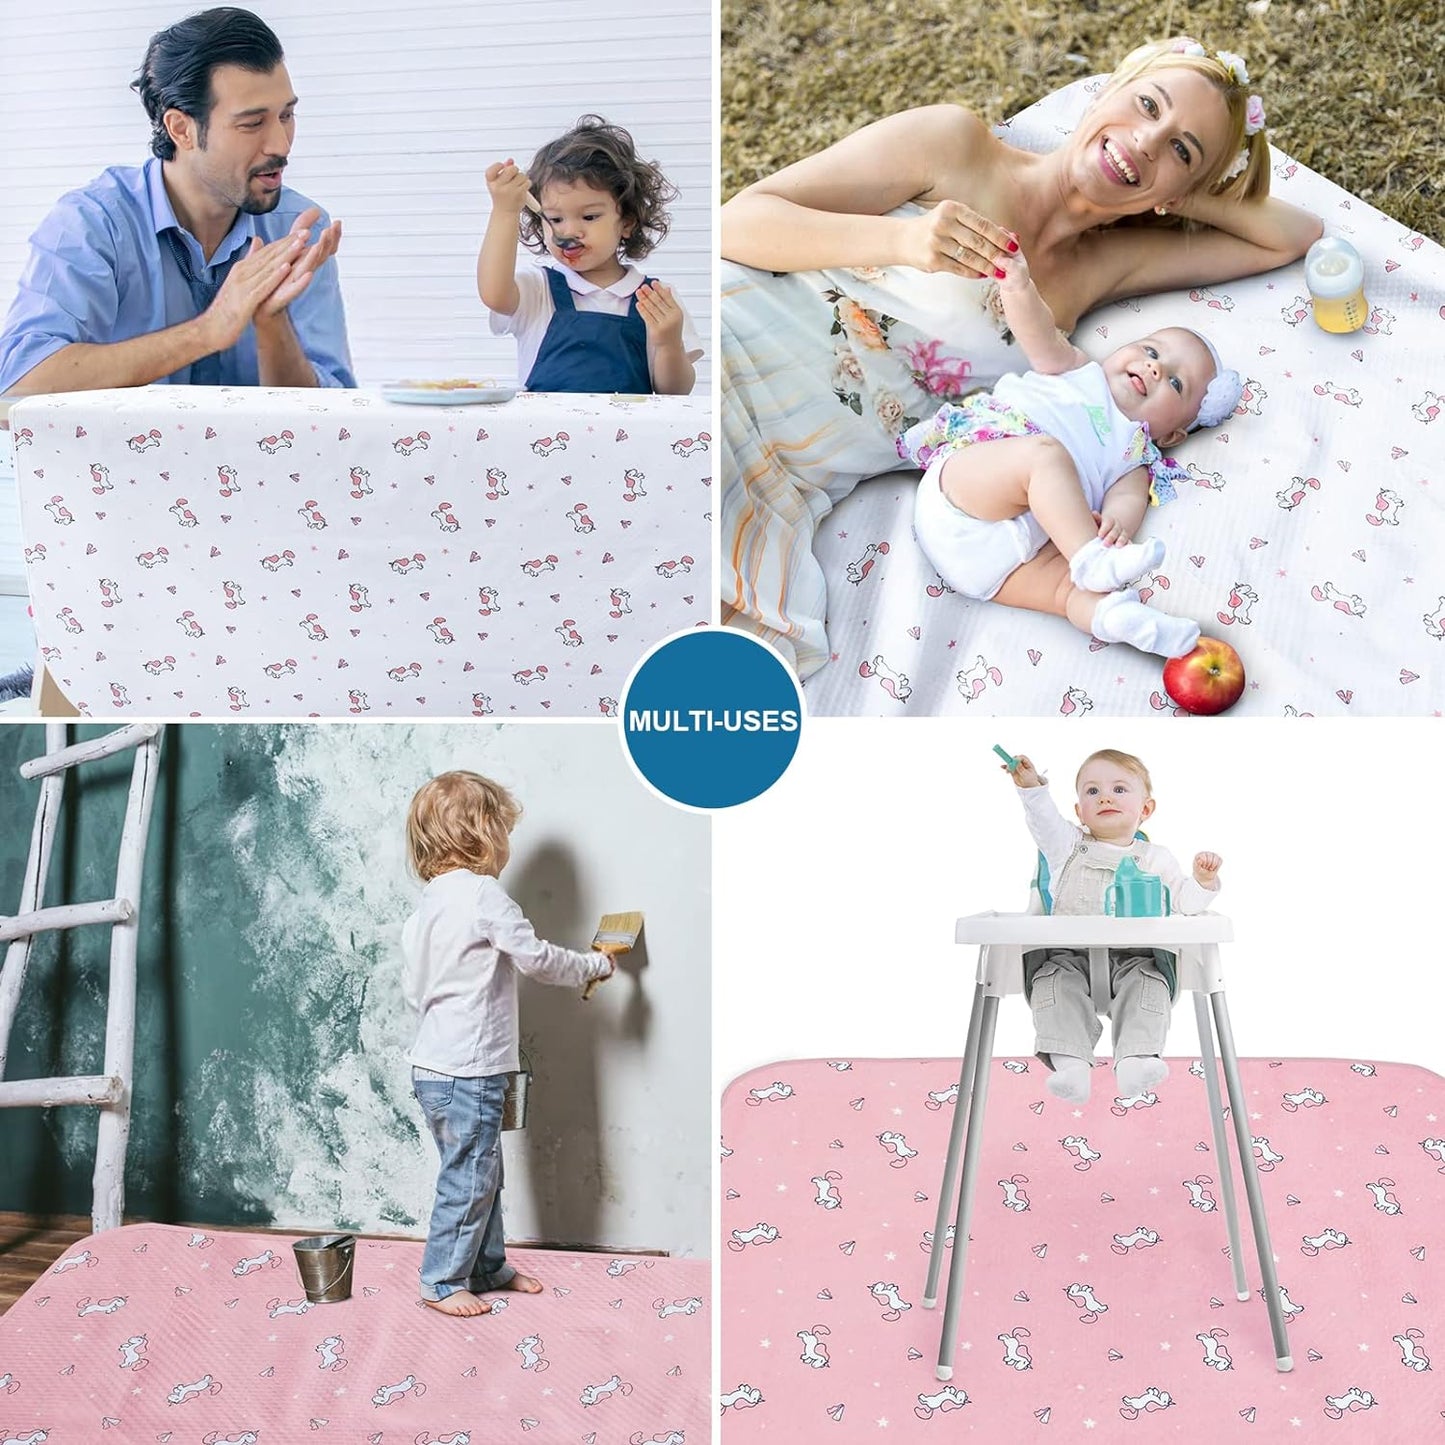 Splat Mat - 2 Pack, Waterproof, For Under High Chair & Arts & Crafts & Eating Mess, Anti-Slip & Reusable & Portable, Pink & White Horse